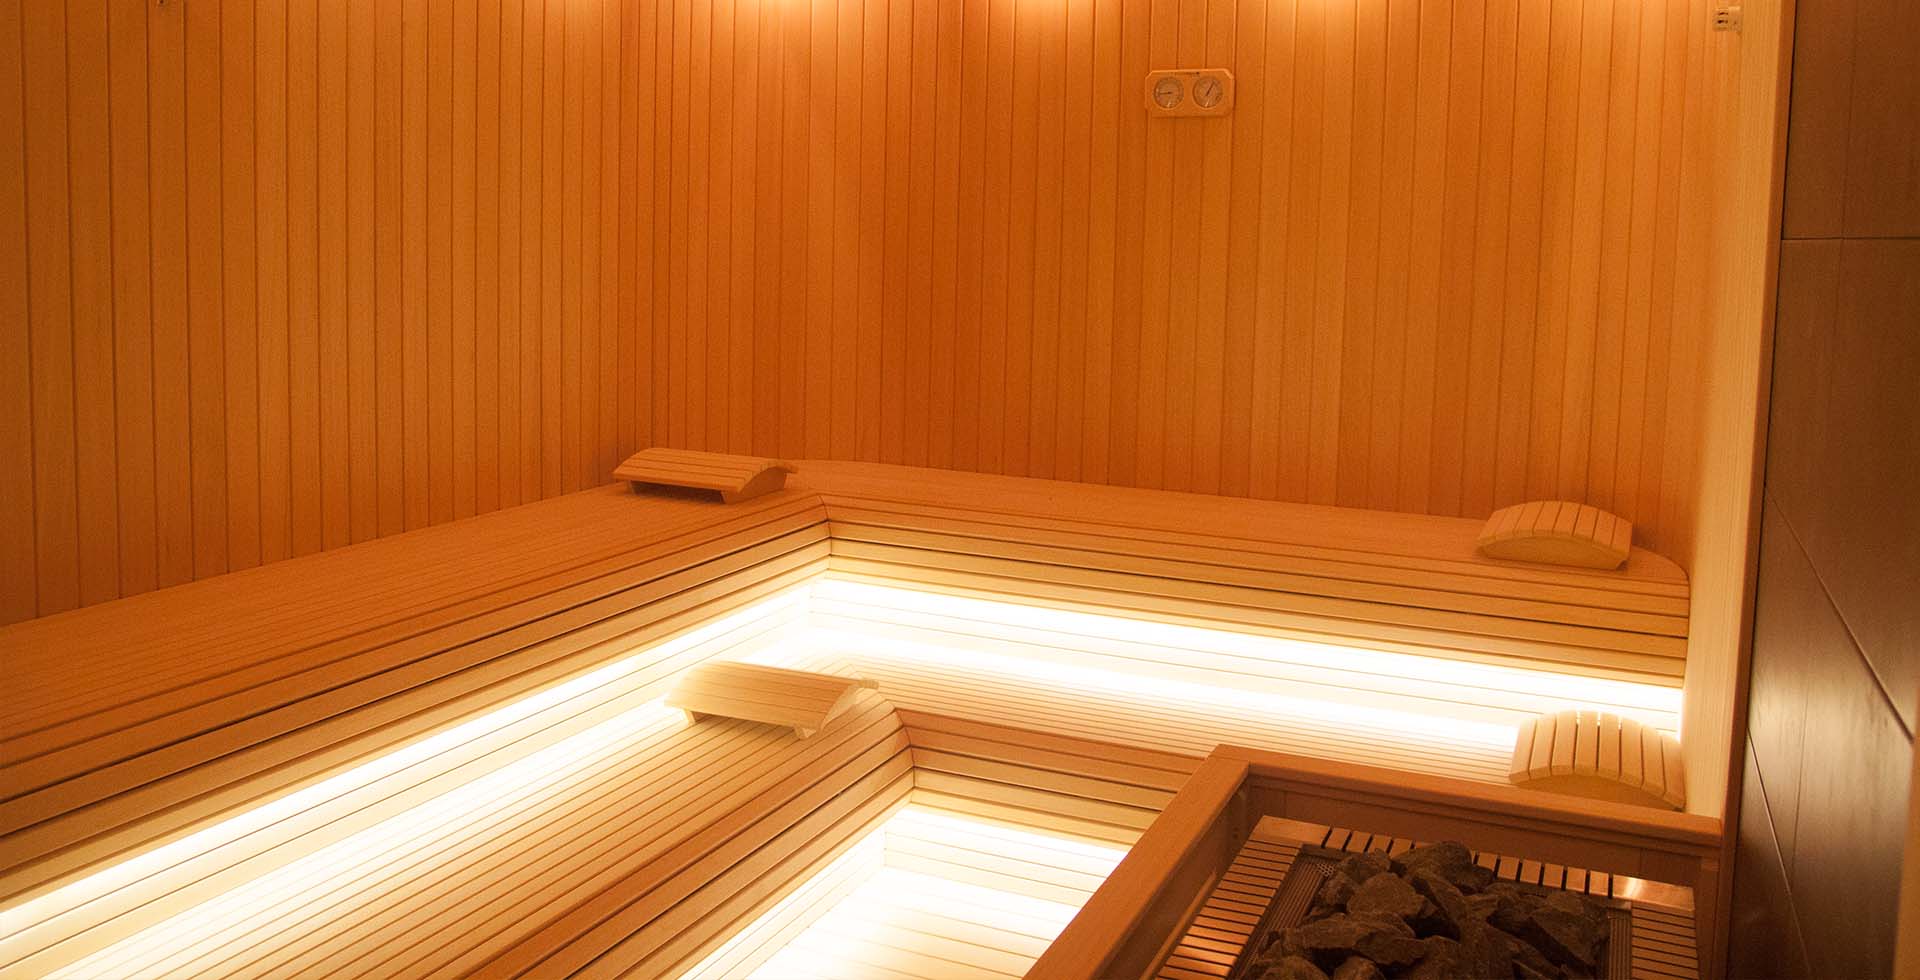 Discover opulence in every detail – the Doha sauna, available for purchase. Unleash a world of relaxation with our sophisticated design at an affordable cost.